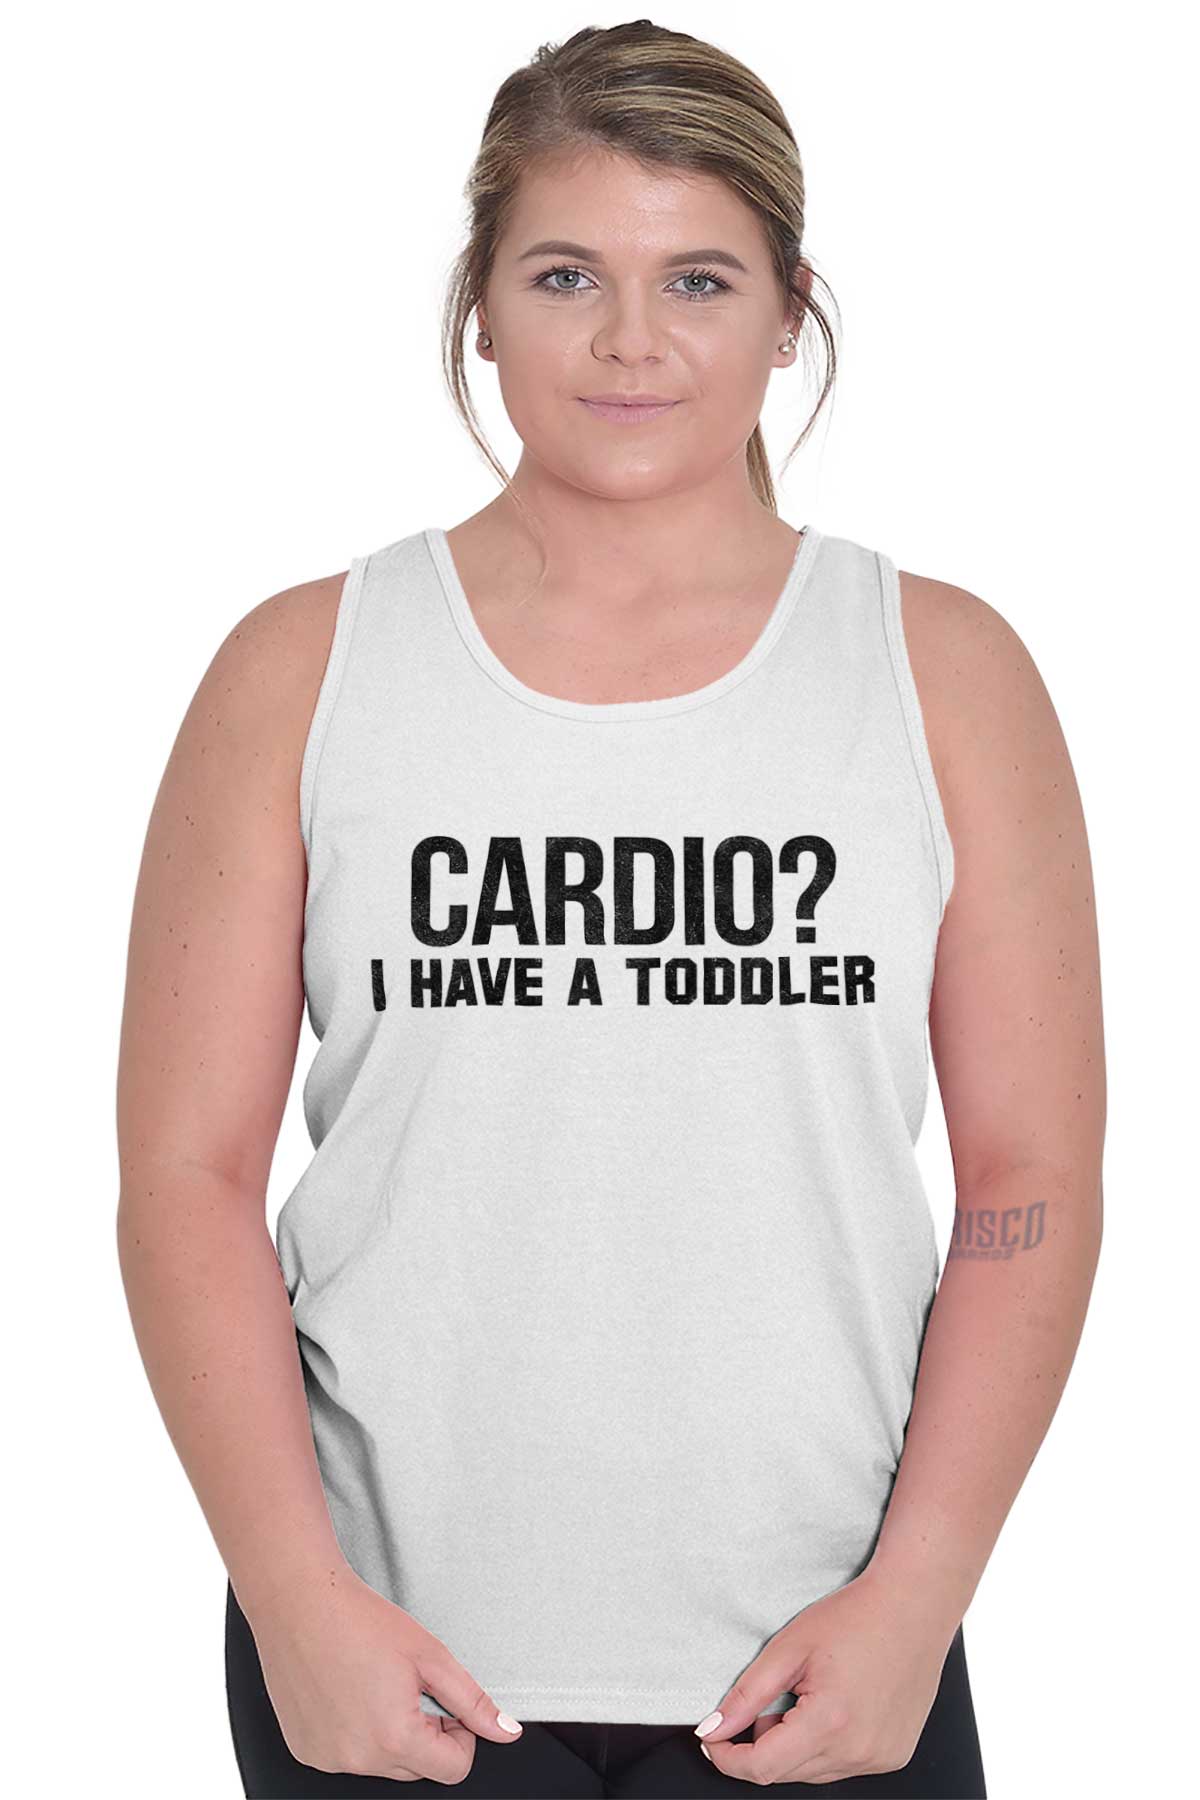 Cardio I Have a Toddler Funny Mom Gym Tank Top T Shirts Men Women Brisco Brands X - image 3 of 7